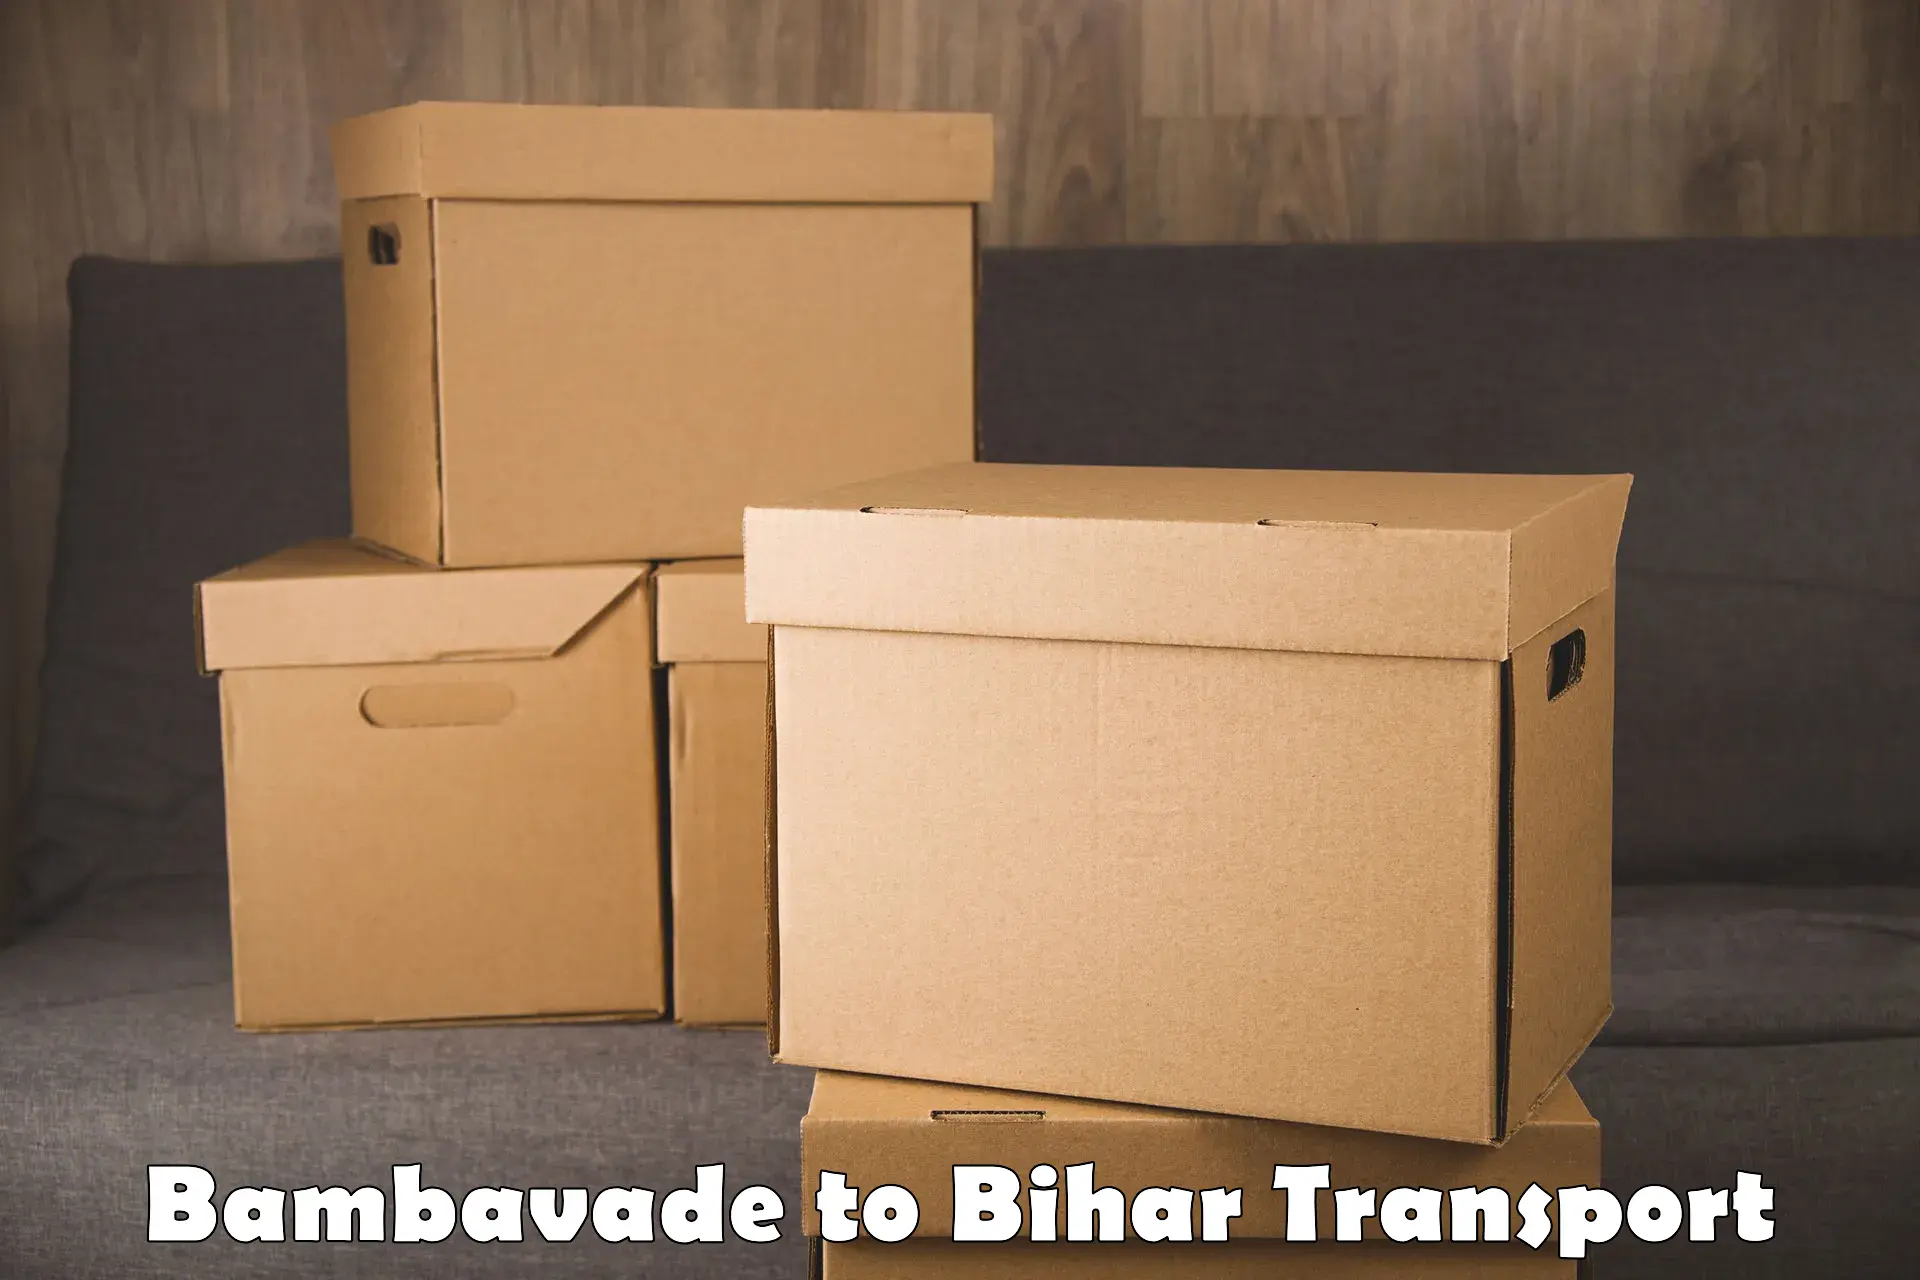 Container transport service Bambavade to Biraul